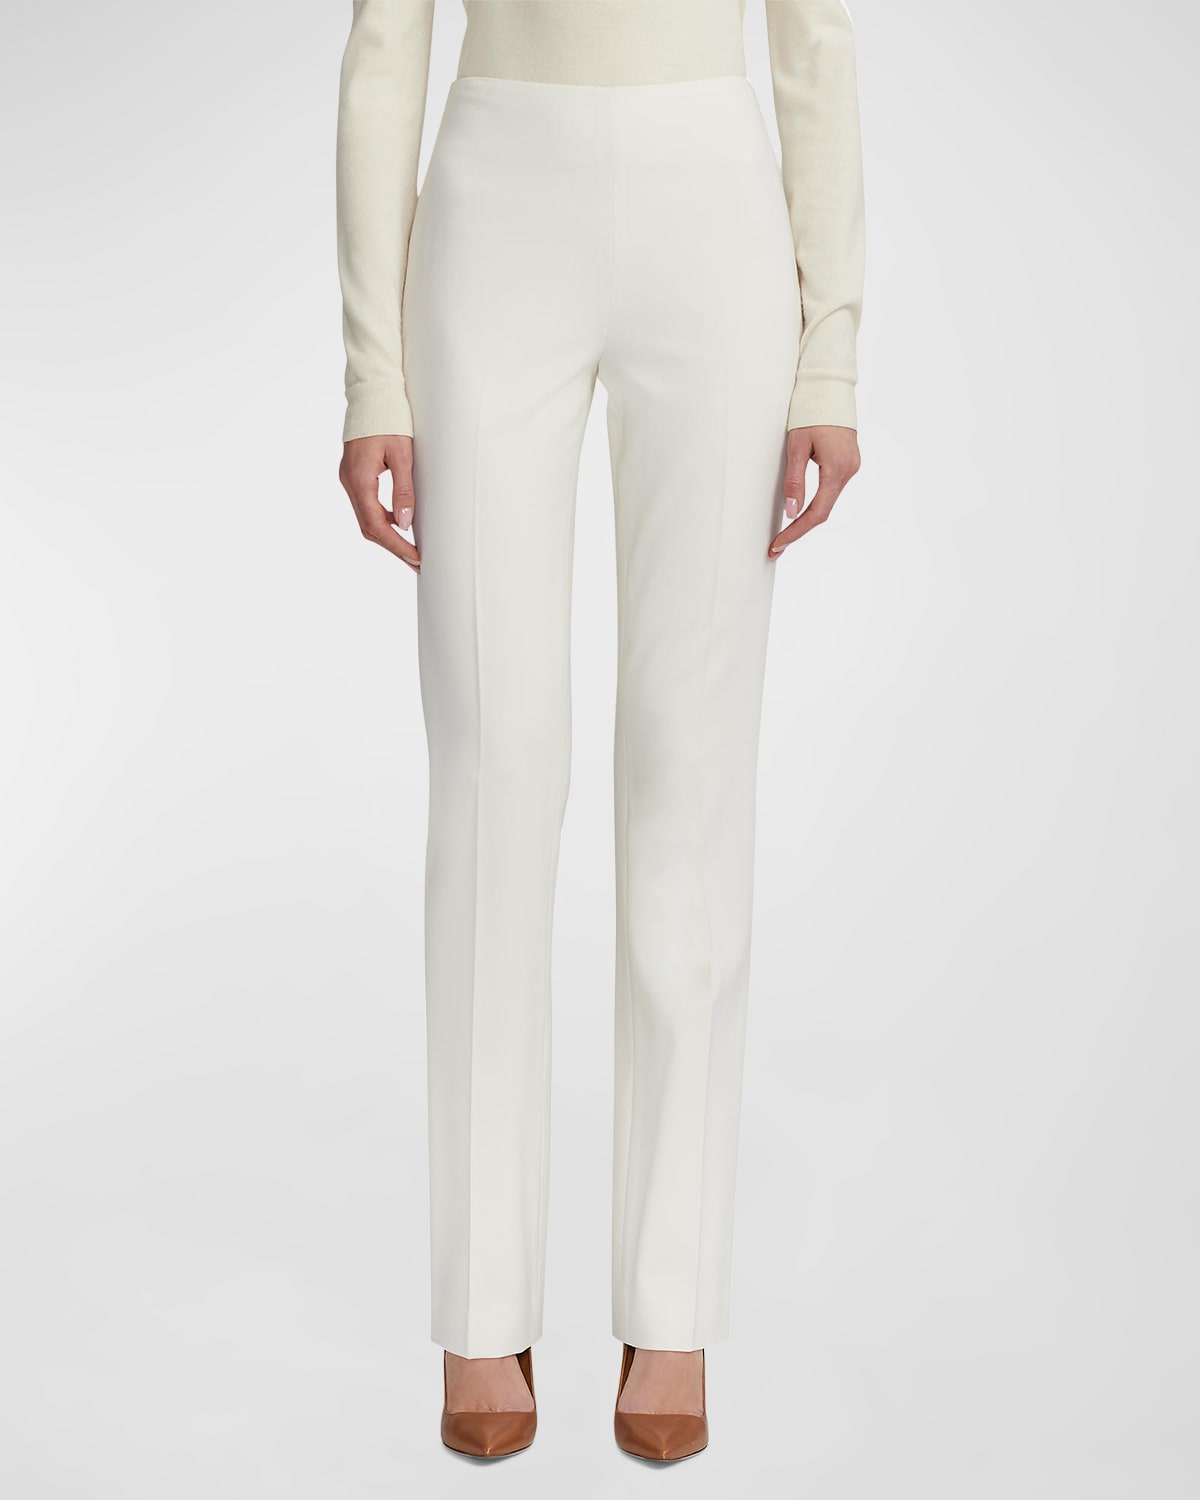 Markus Lupfer Wool Pants in Ivory Slacks and Chinos Straight-leg trousers White Womens Clothing Trousers 